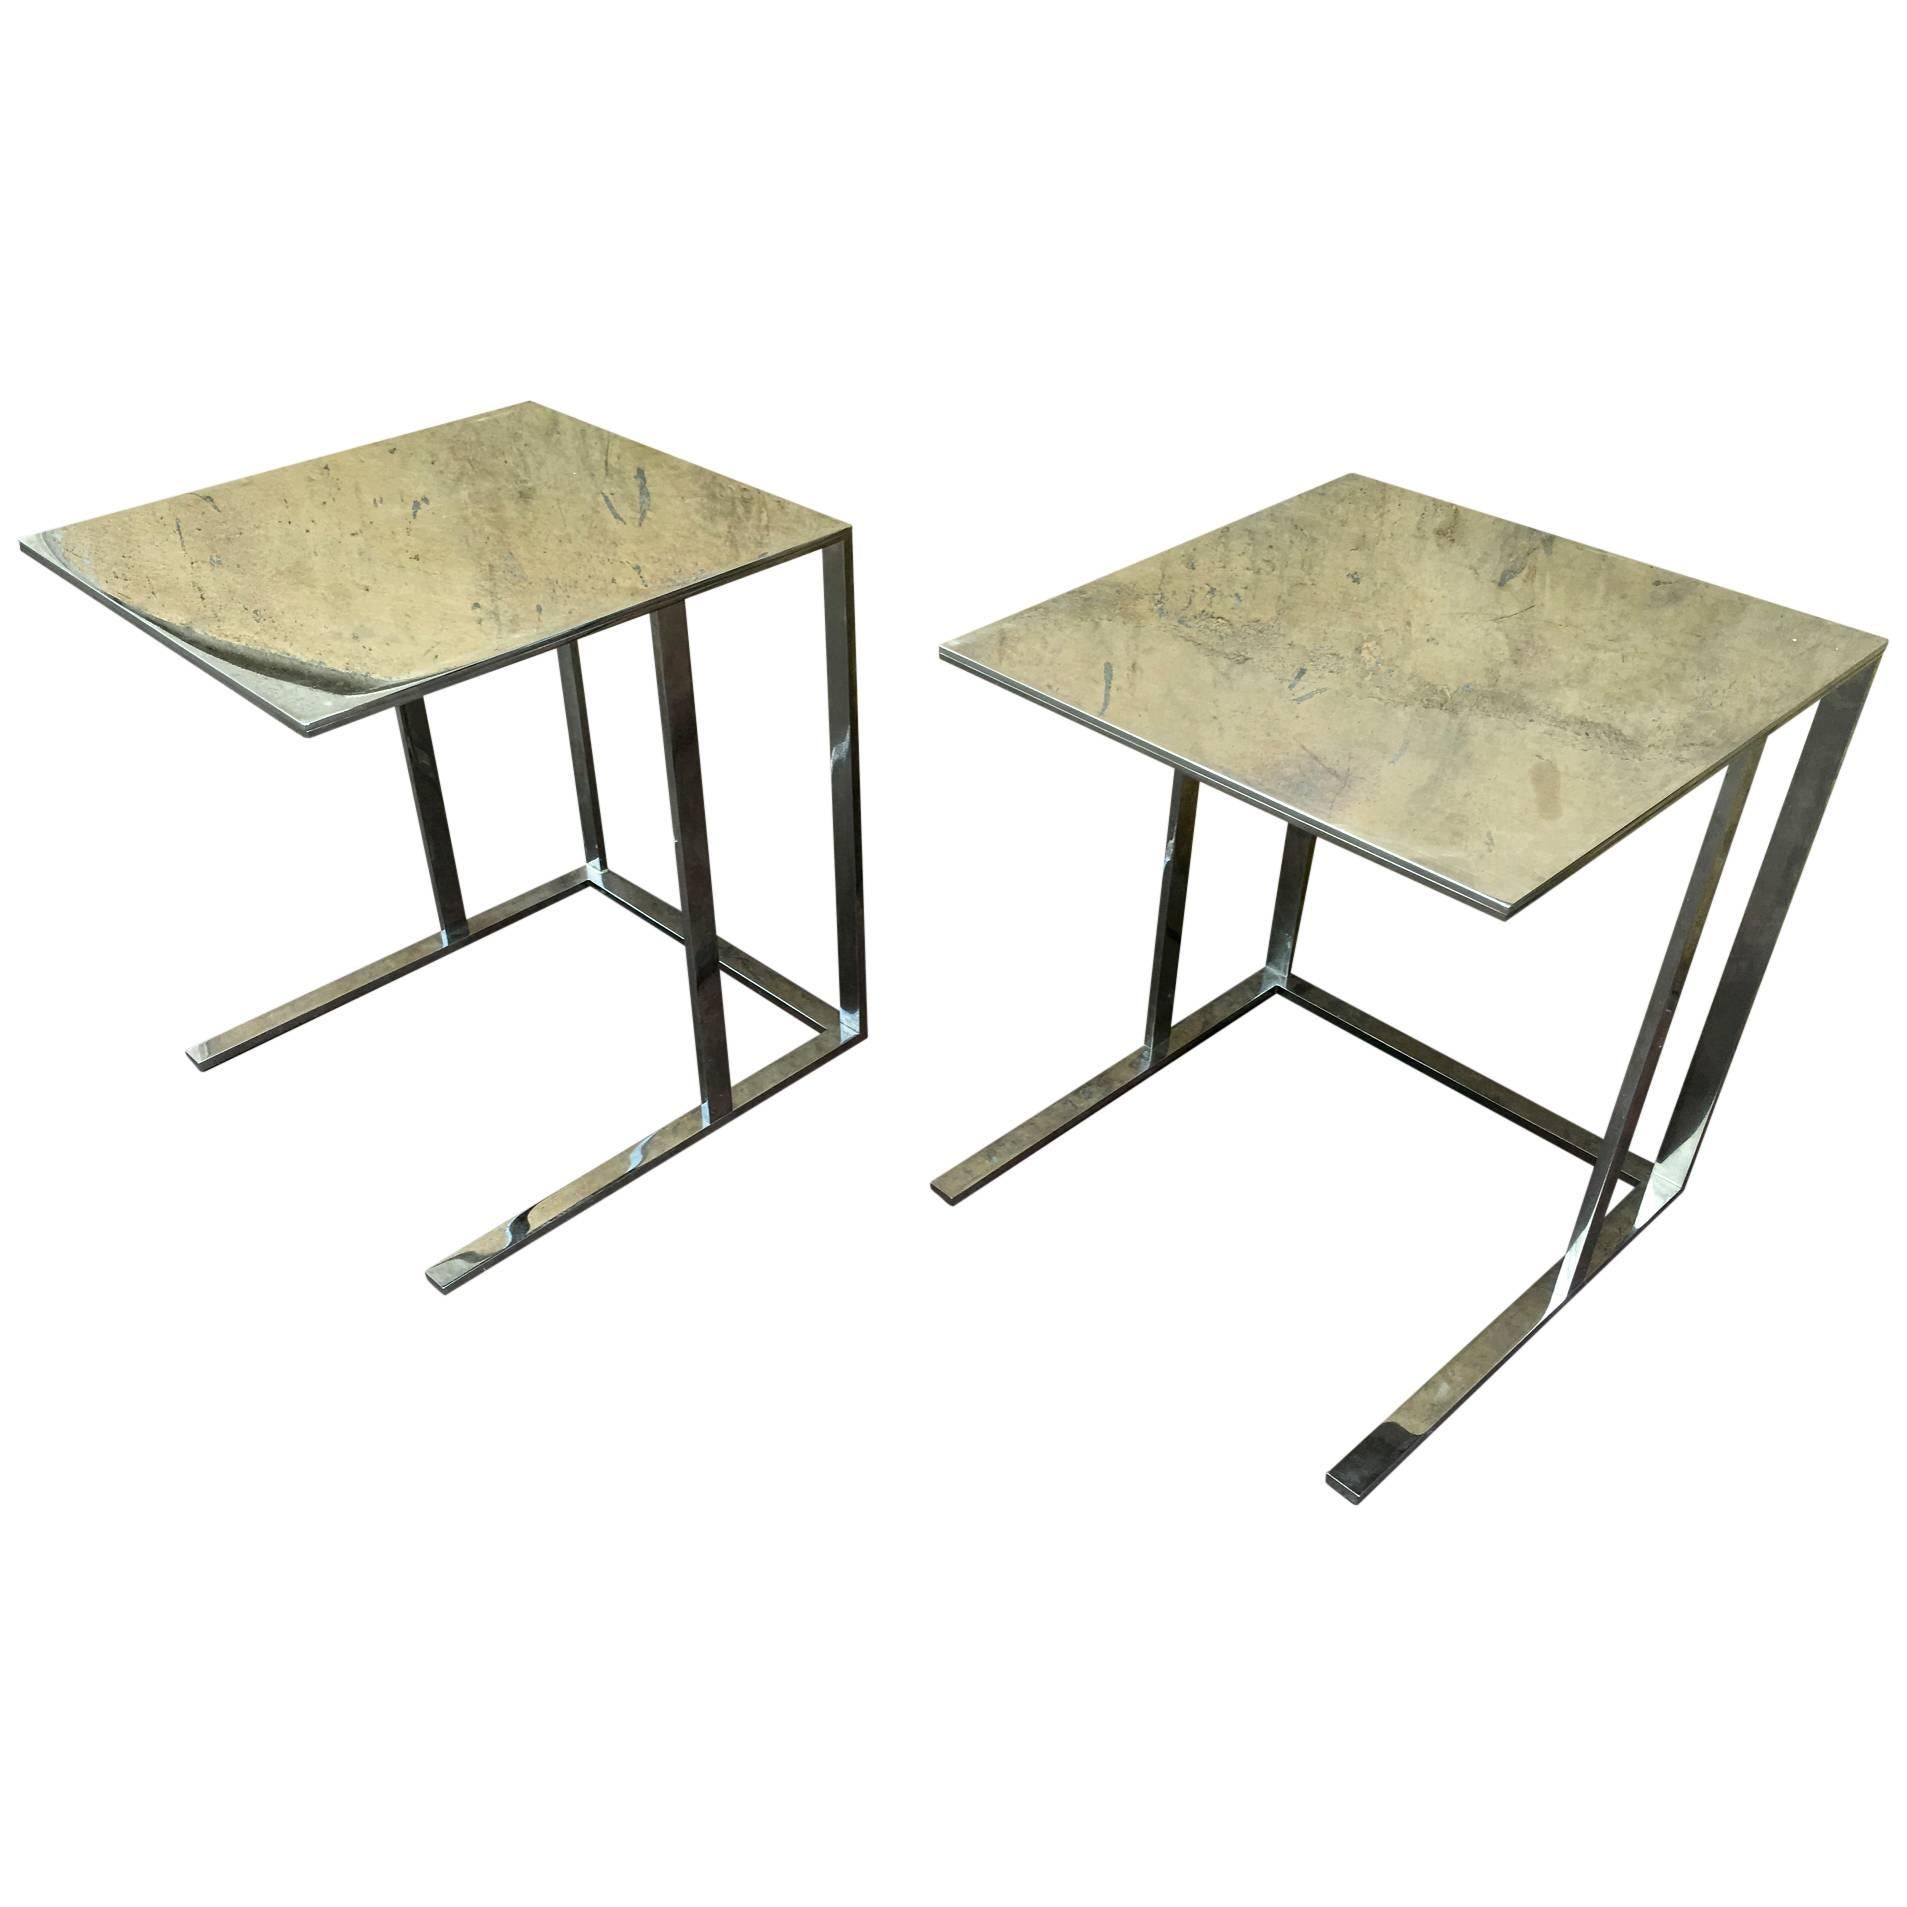 Pair of Modern Polished Steel Side Tables with Pure Design For Sale